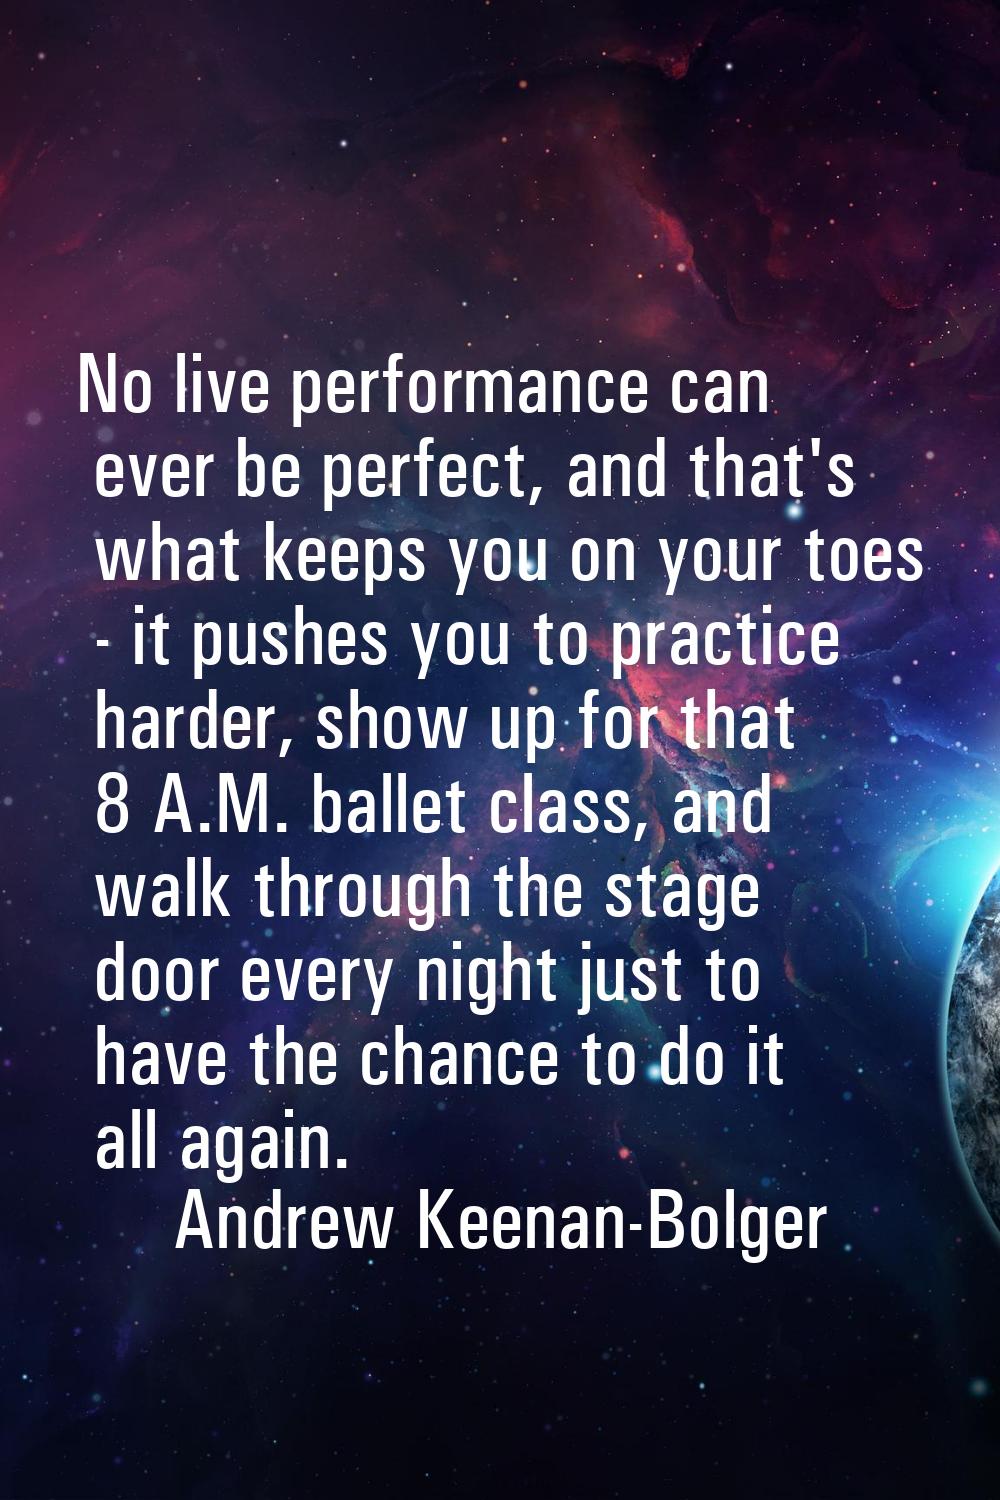 No live performance can ever be perfect, and that's what keeps you on your toes - it pushes you to 